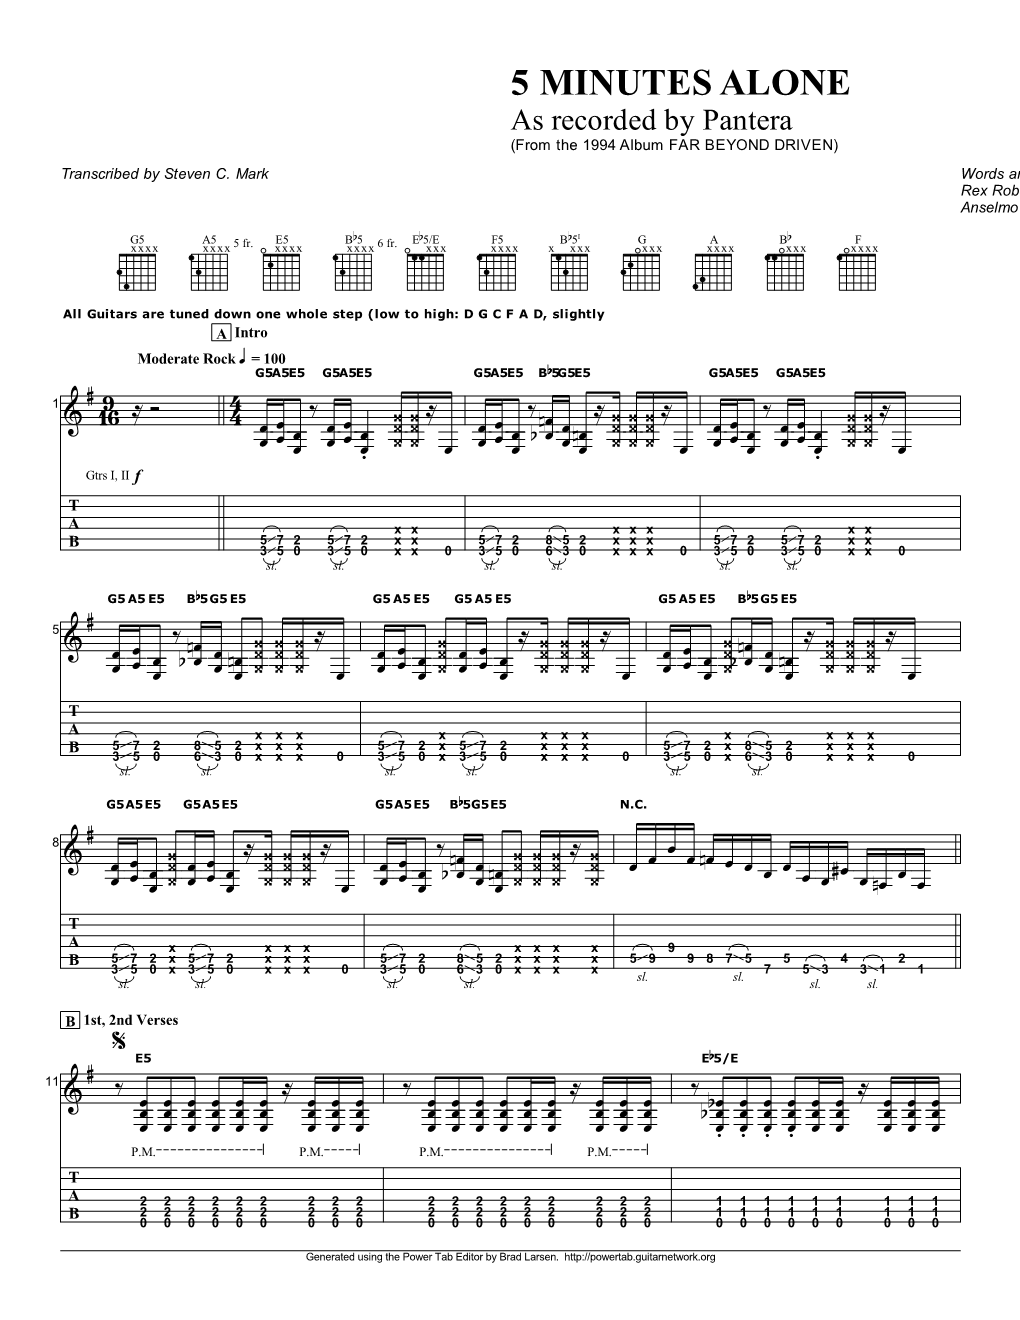 Pantera (From the 1994 Album FAR BEYOND DRIVEN) Transcribed by Steven C